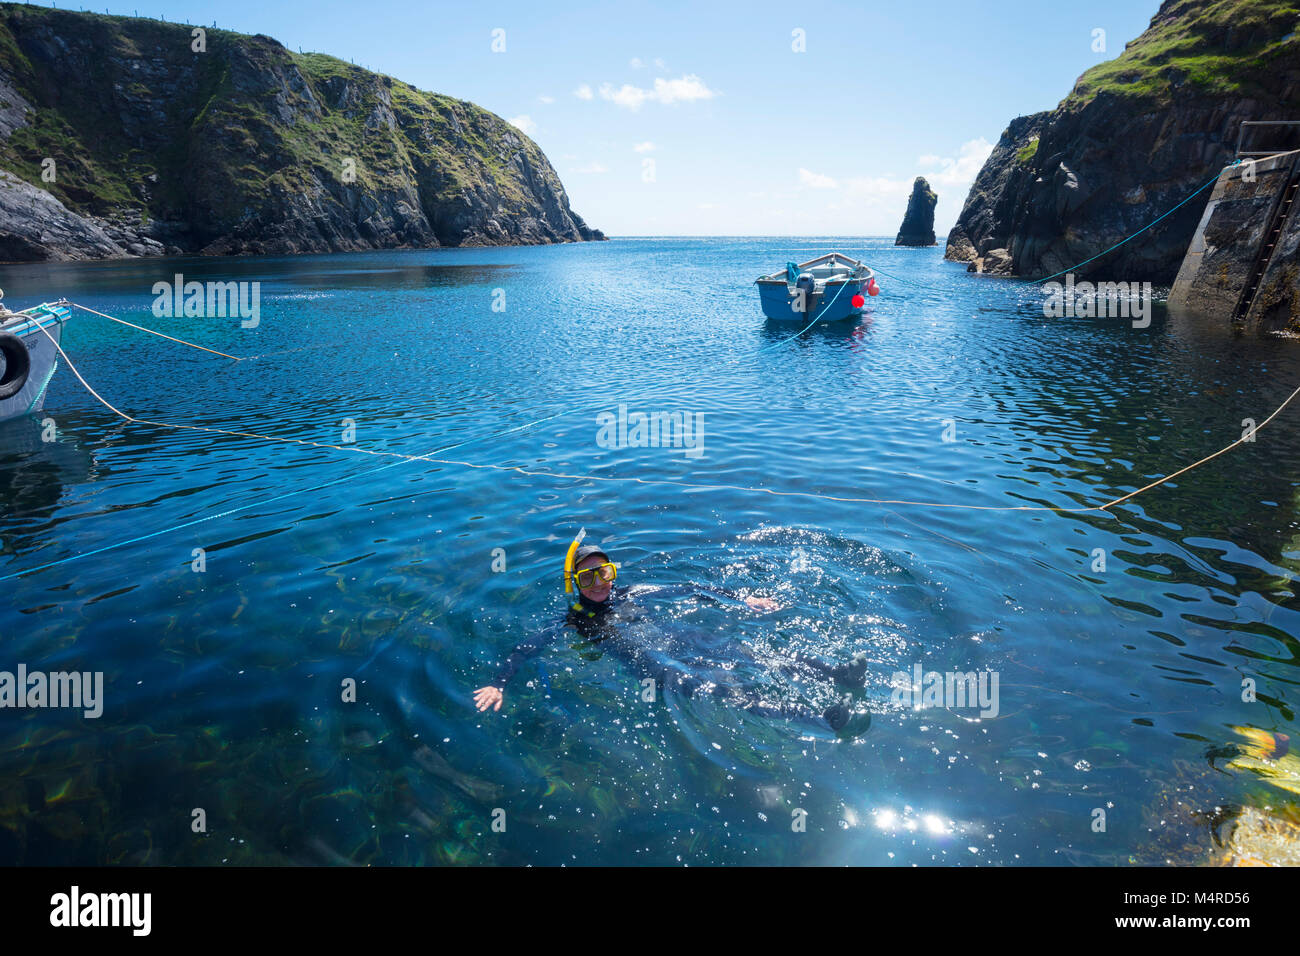 Snorkeling in Malin Beg Harbour, County Donegal, Ireland. Stock Photo